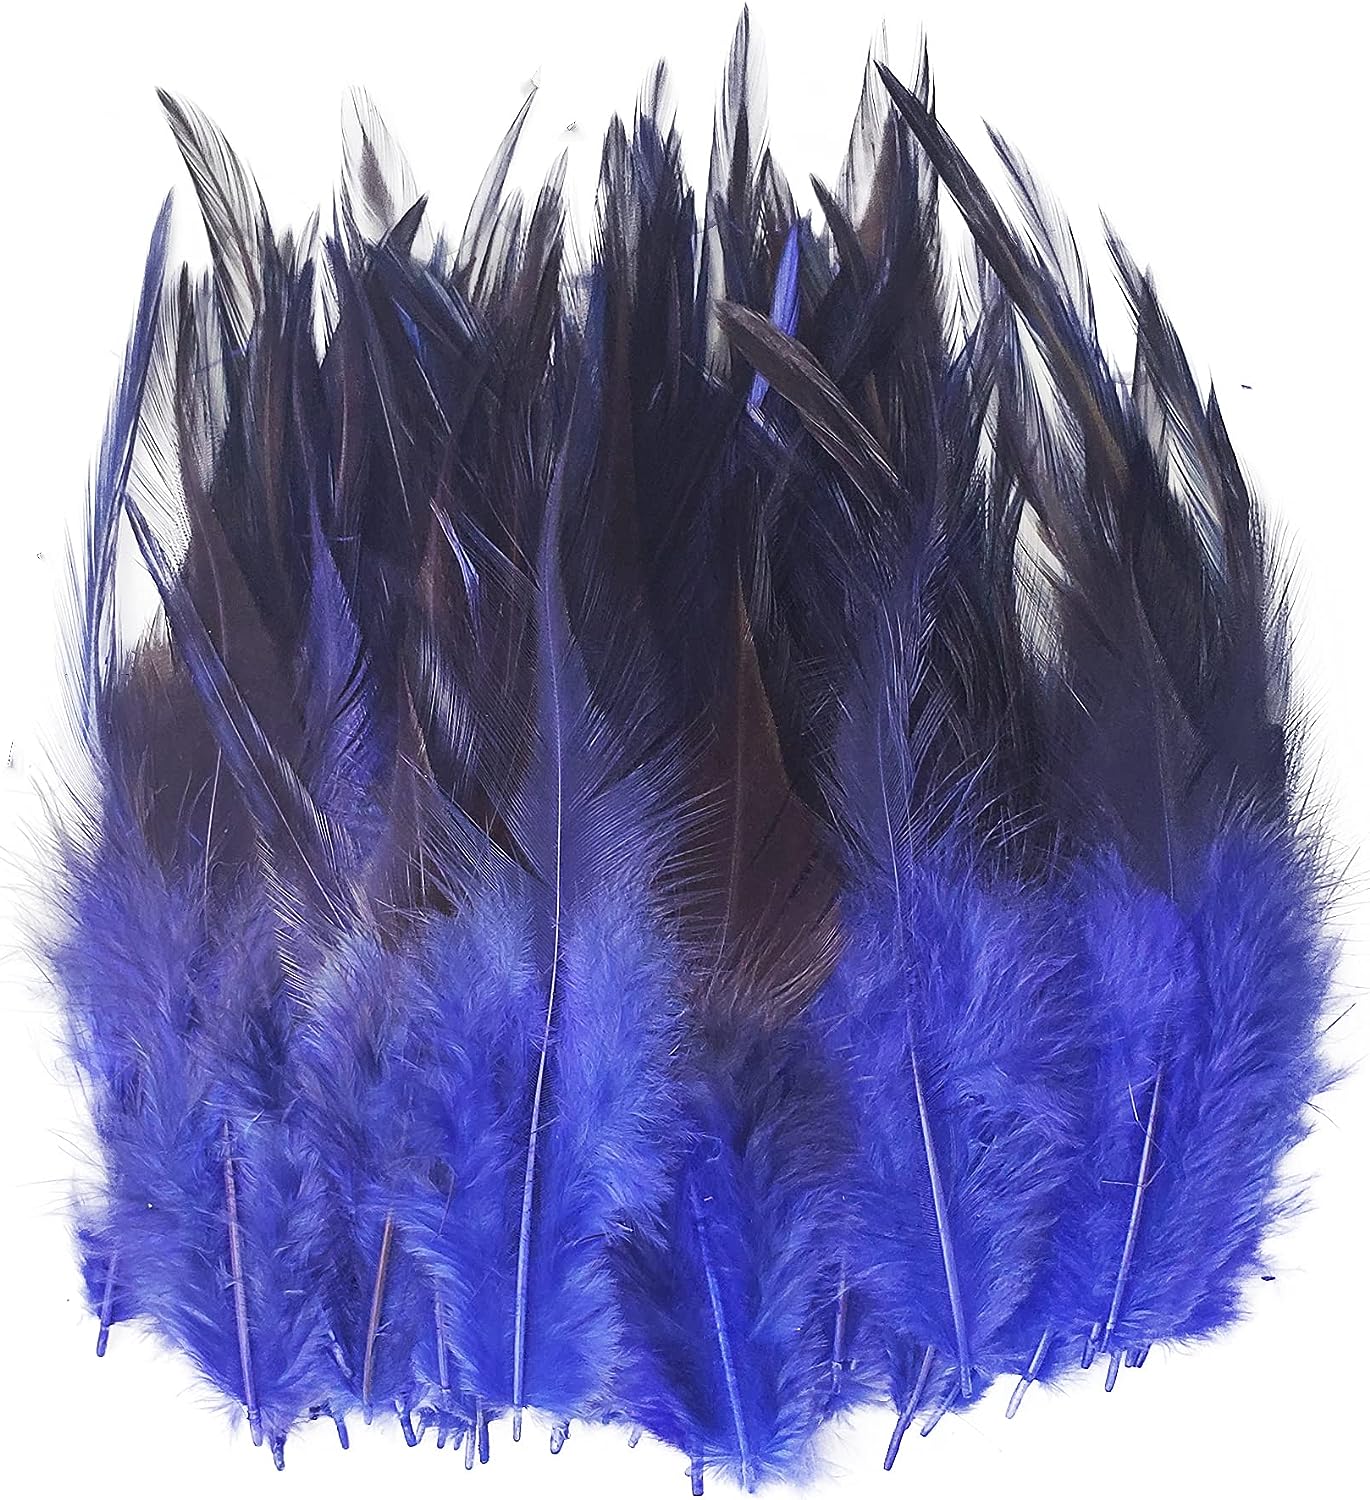 Rooster Saddle Hackle Feathers Bulk 300pcs Colorful Craft Feathers 4-6inch Pheasant Neck Feather for Pendant Earrings Dream Catchers DIY Wedding